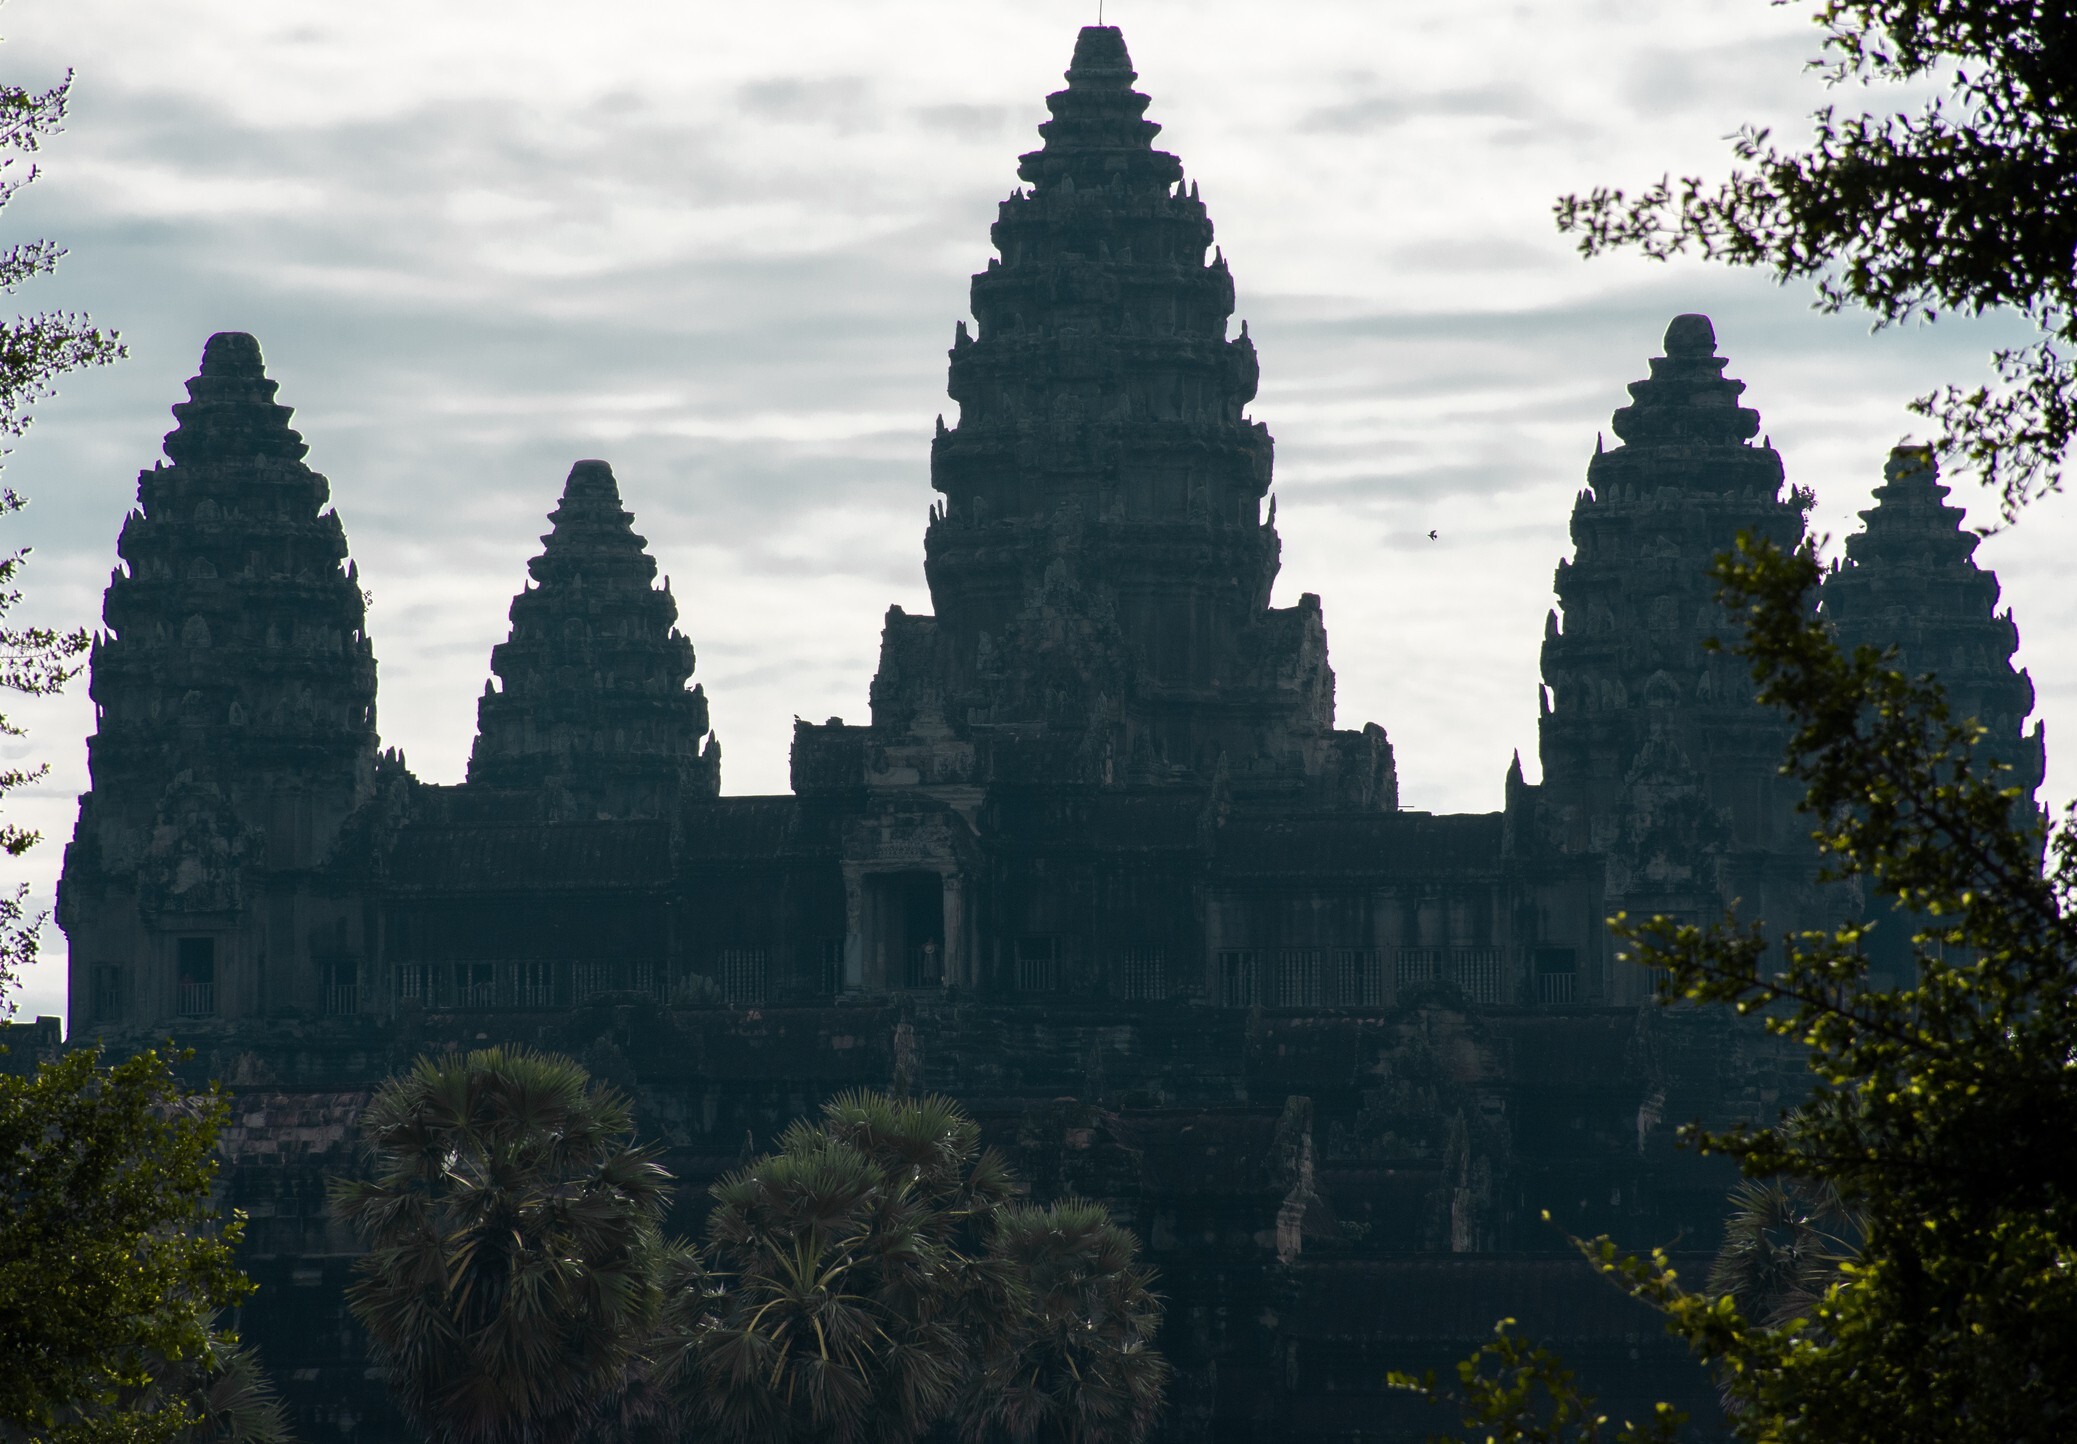 Angkor Wat in Cambodia, the only East Asian destination in Lonely Planet’s Best in Travel 2021 list. Photo: Getty Images